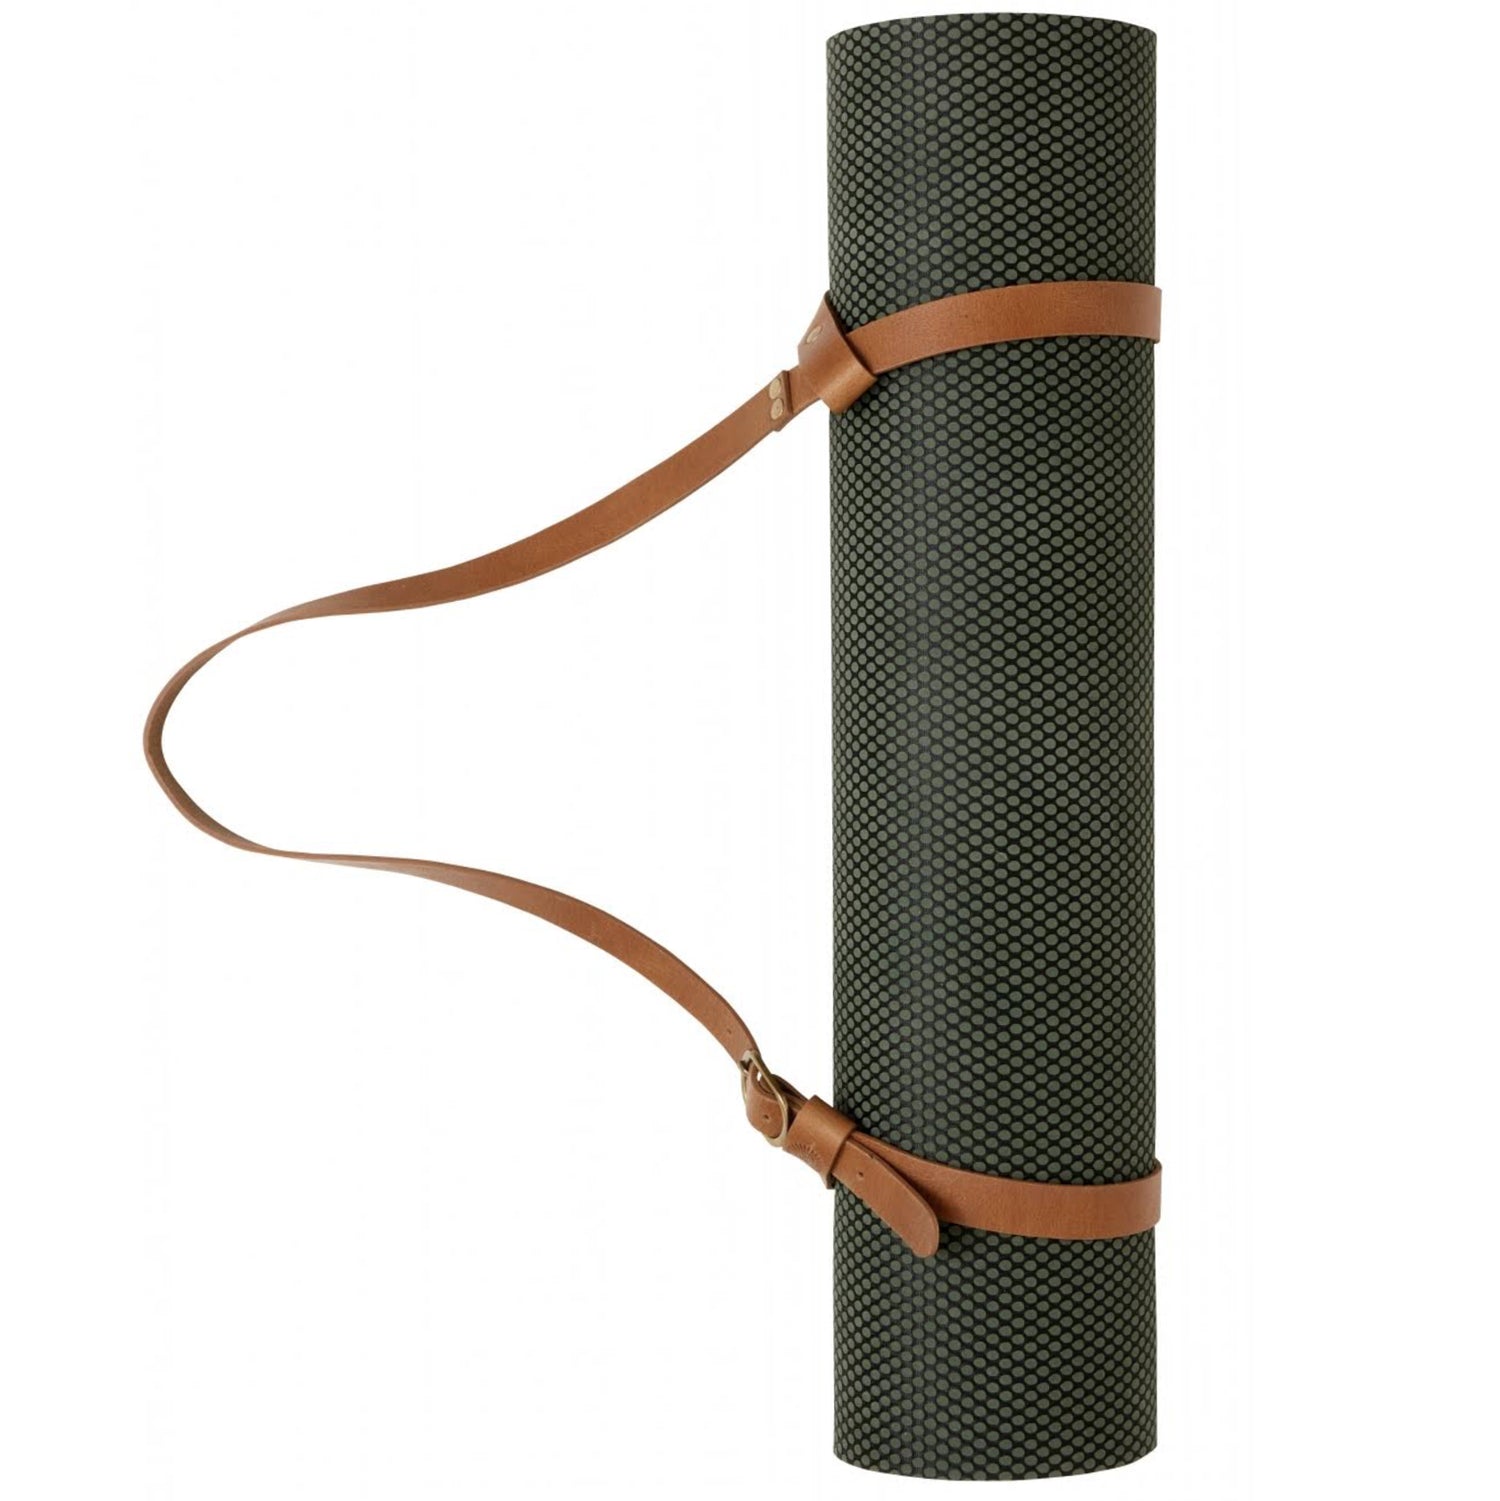 Brown Leather Strap For Yoga Mat